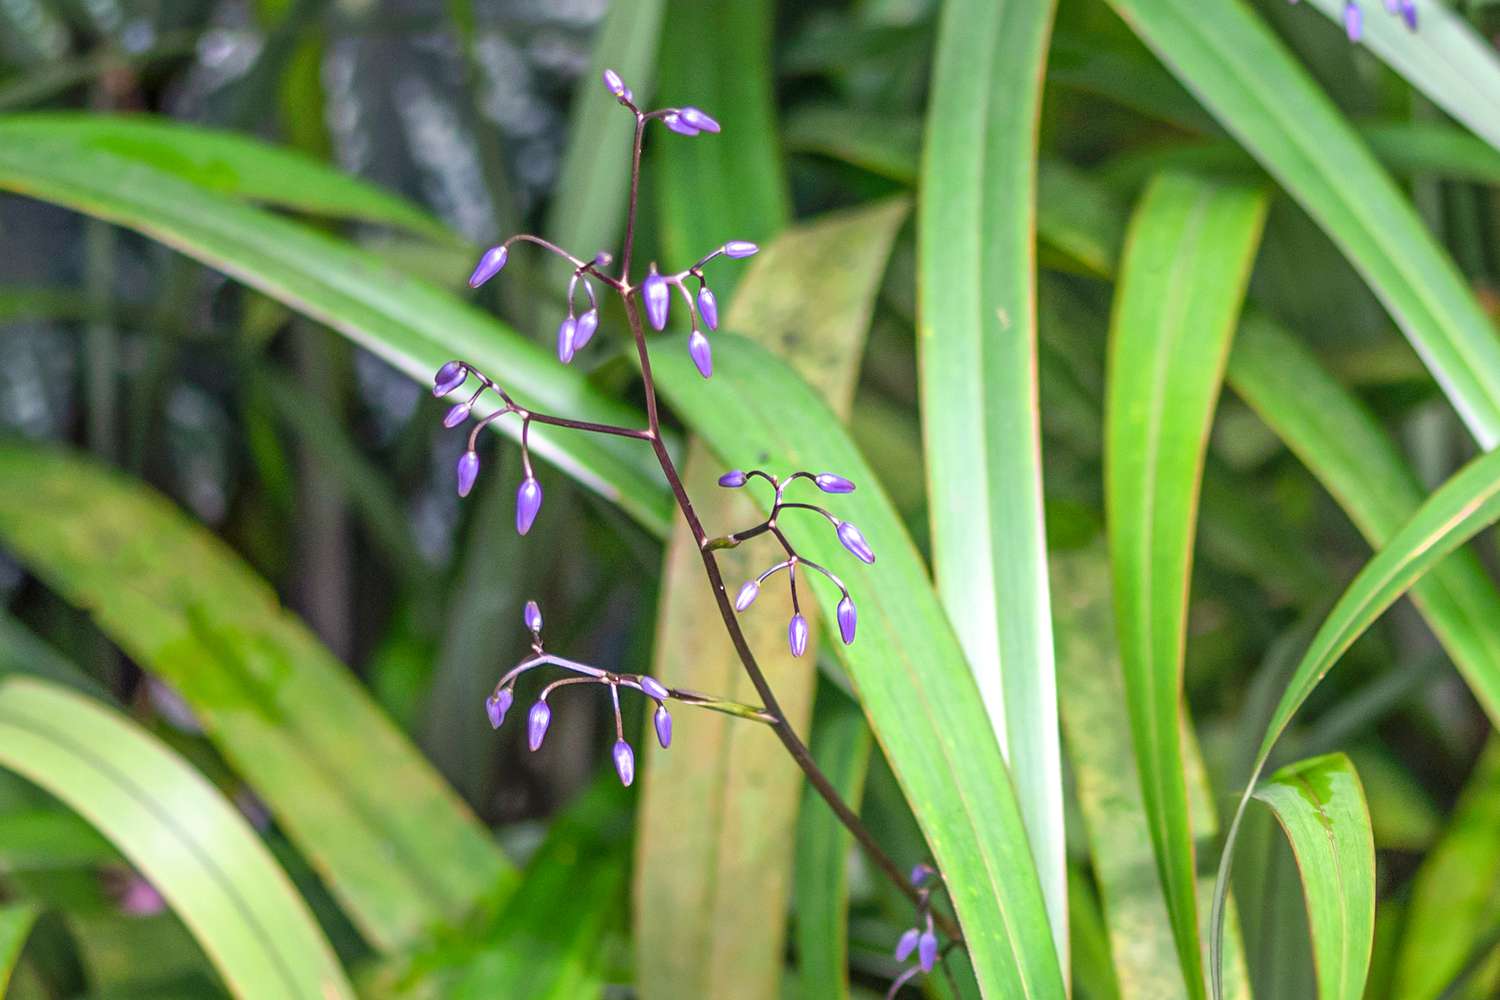 Flax lily plant with tiny purple flower panicles on thin stalk